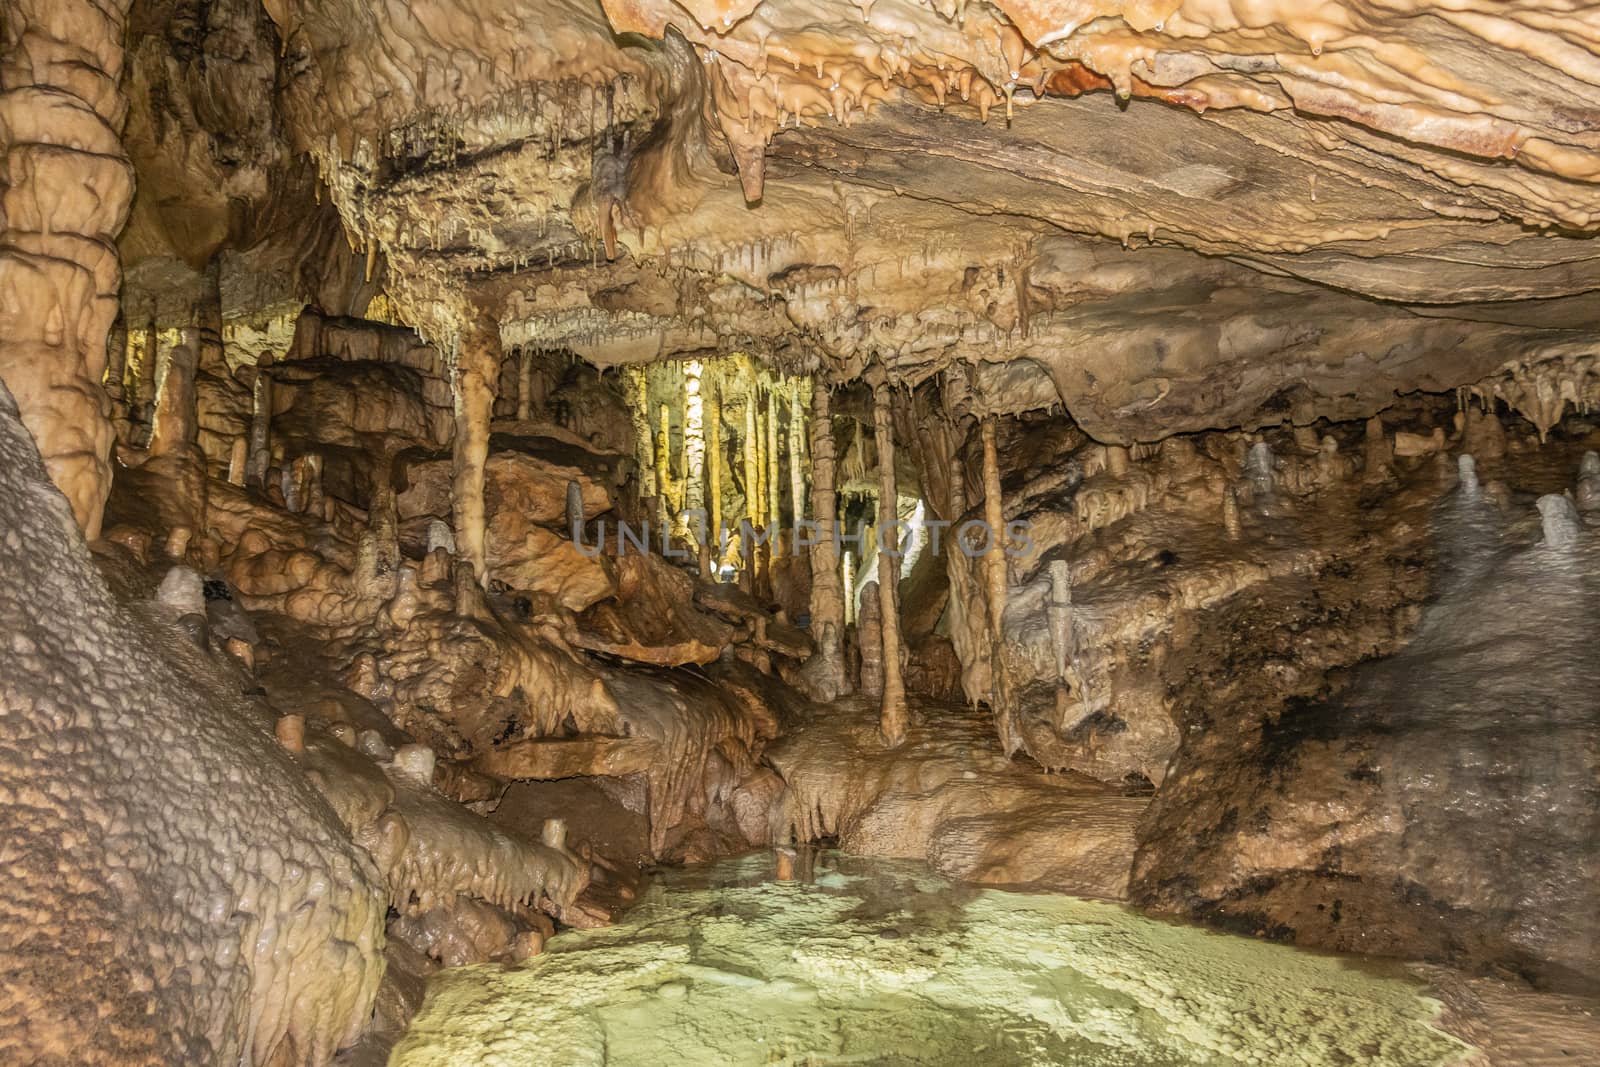 Han-sur-Lesse, Belgium - June 25, 2019: Grottes-de-Han 10 of 36. subterranean pictures of Stalagmites and stalactites in different shapes and colors throughout tunnels, caverns and large halls..